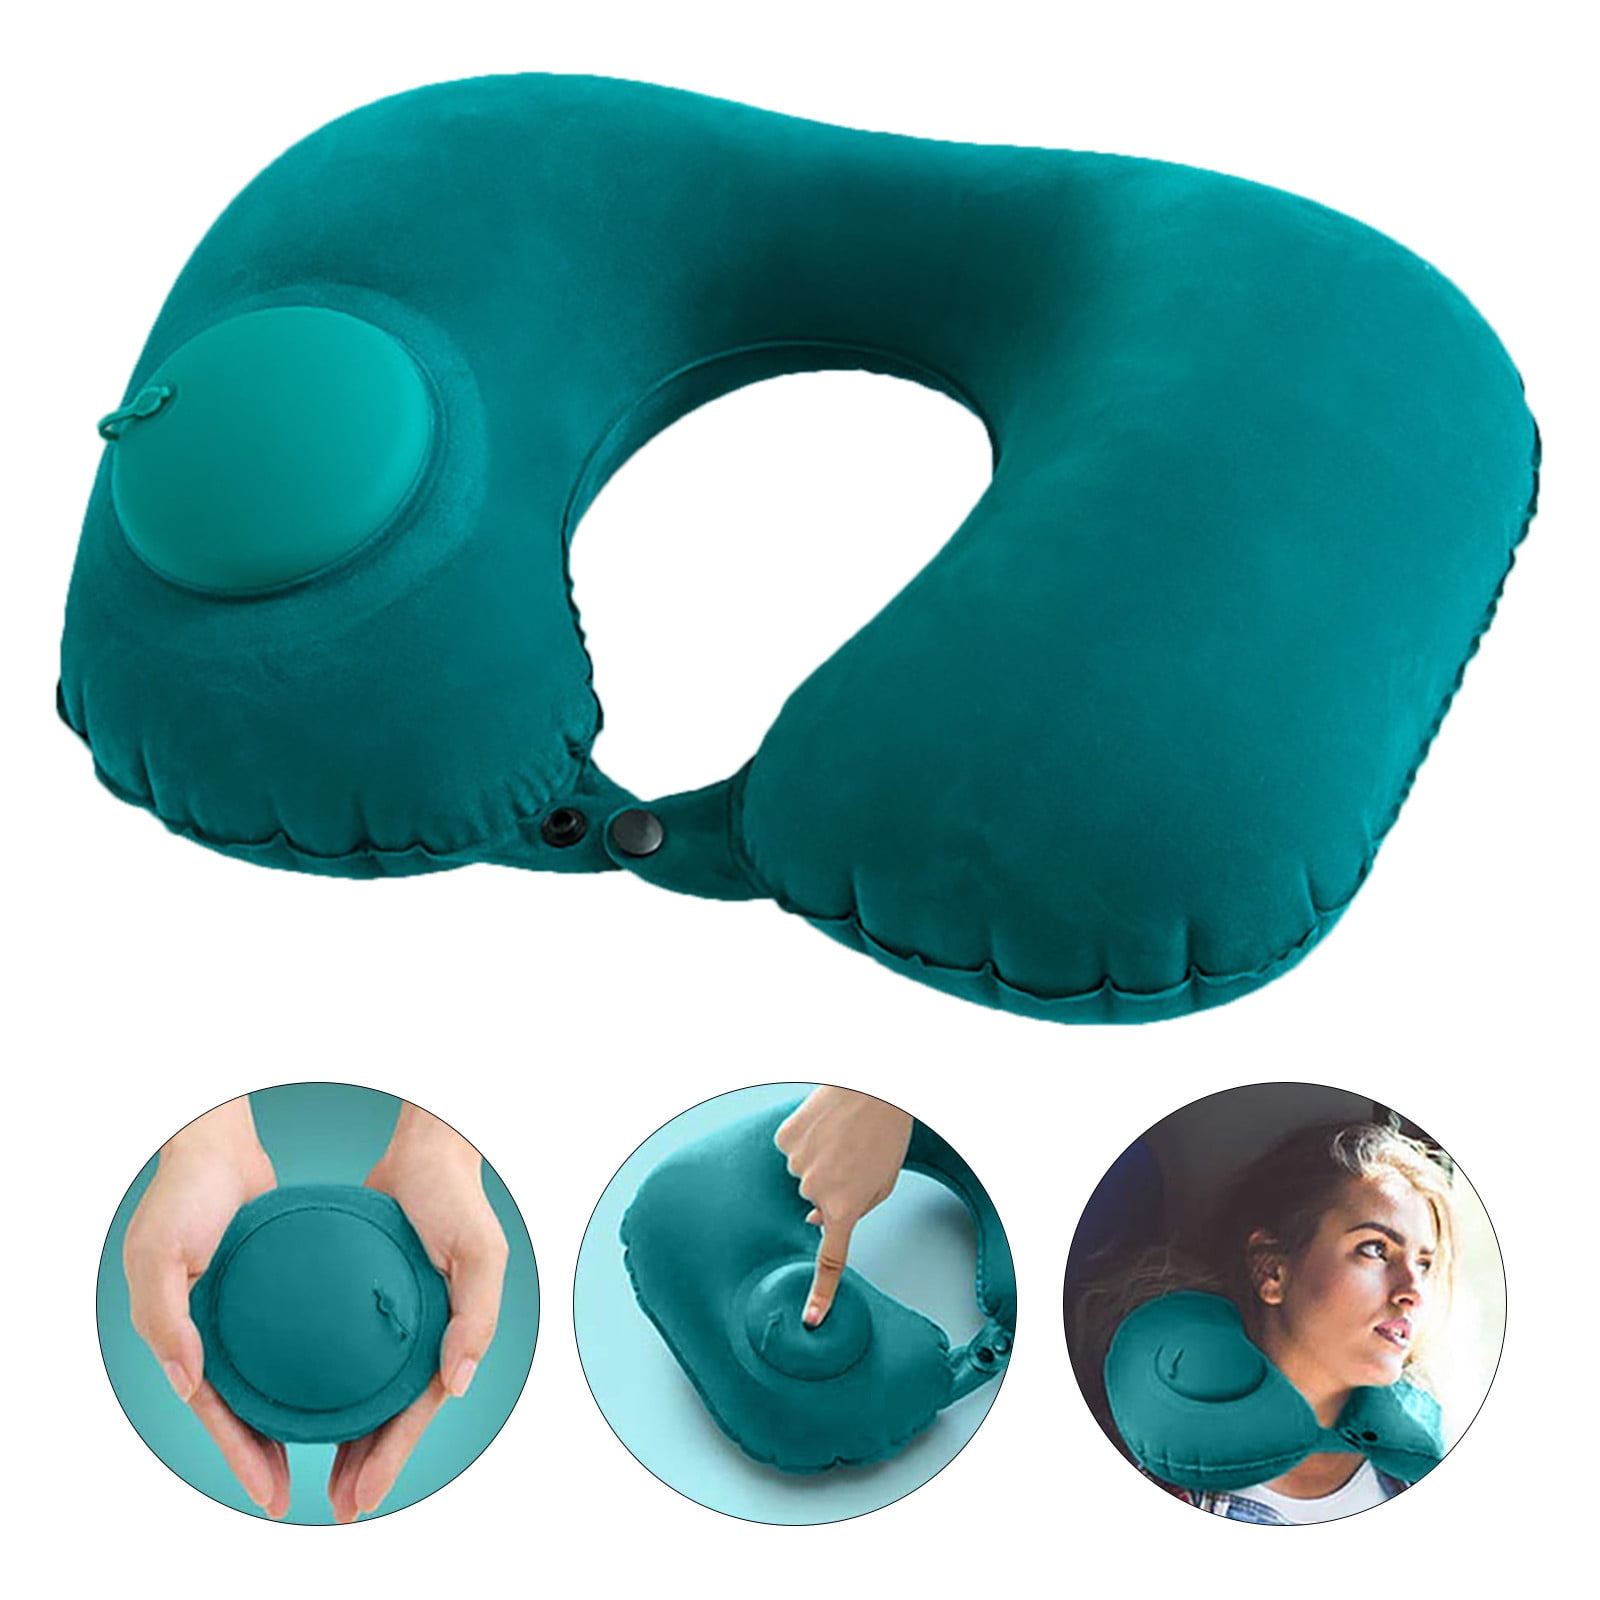 Noarlalf Body Pillow Case Air Cushion Self Inflating Button Travel Neck  Pillow Inflatable Plane Car Train Pillow Portable Soft U Shaped Travel  Pillow Flocking Fabric King Pillow Case 13*13*5 